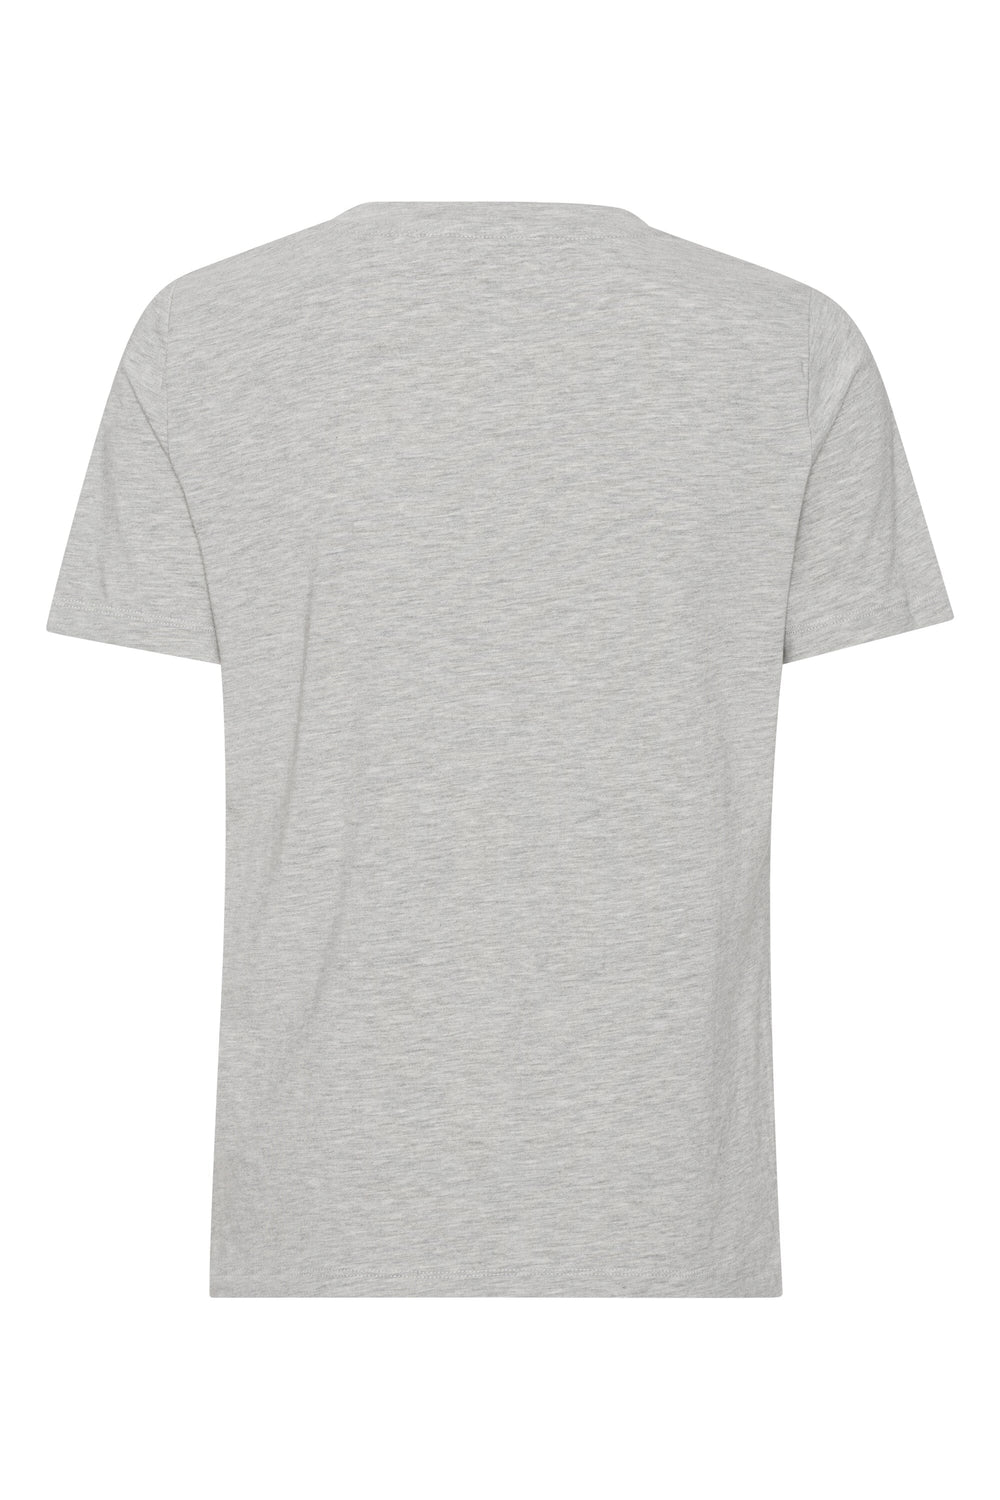 A-VIEW - Stabil Top S/S - 055 Light Grey Melange T-shirts 